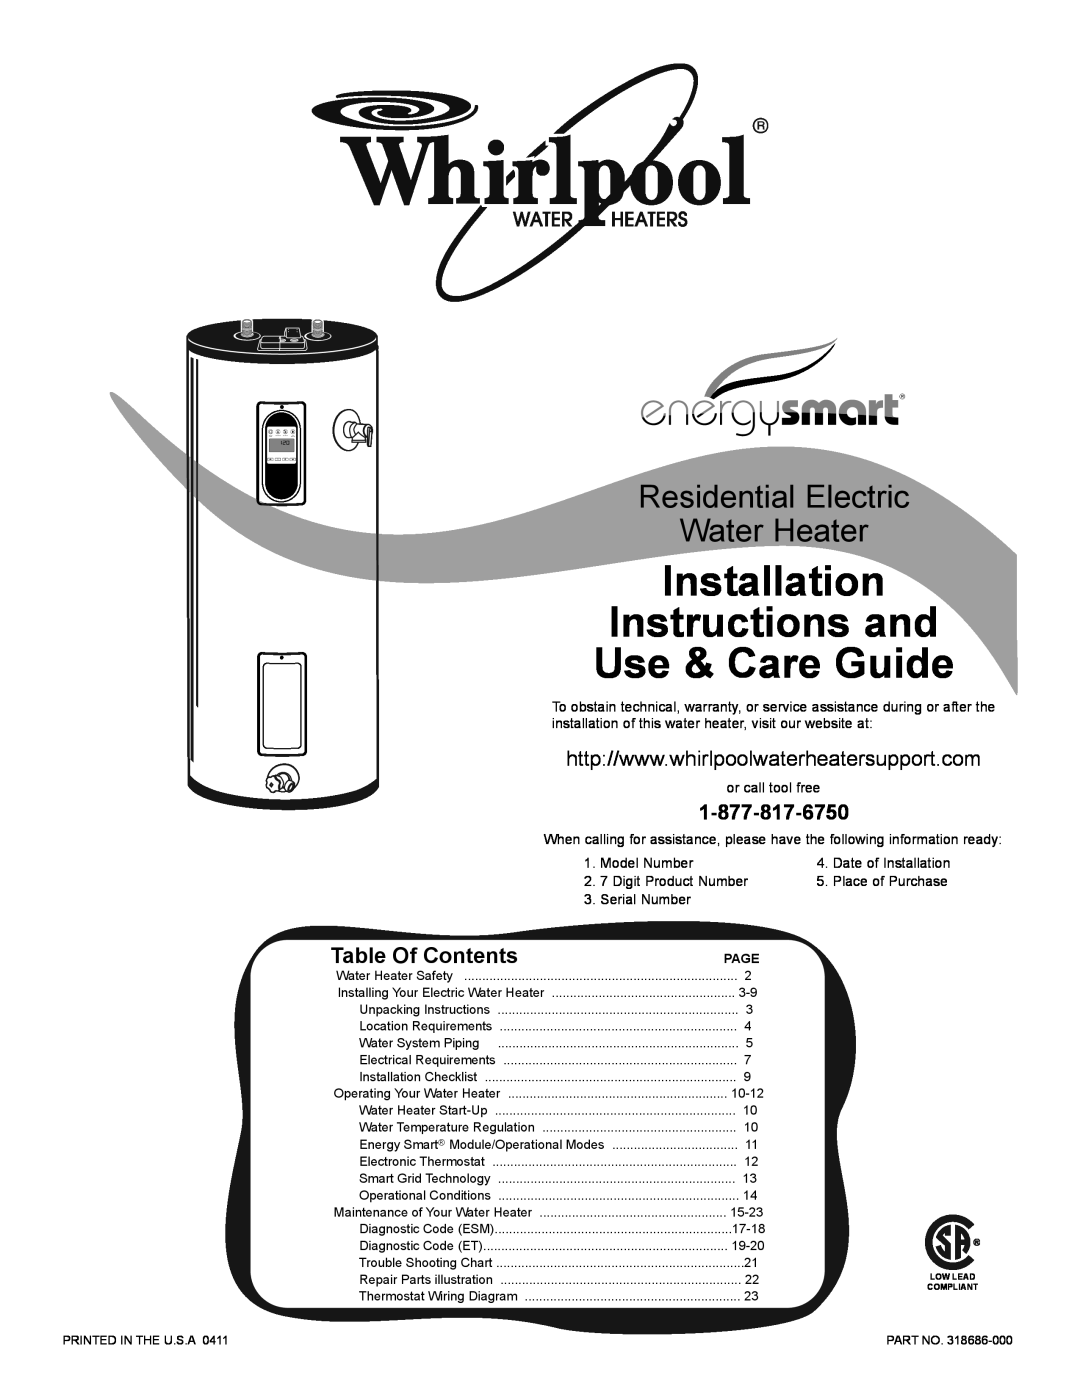 Whirlpool 318686-000 installation instructions Instructions and, Use & Care Guide, Installation, Table Of Contents, Page 